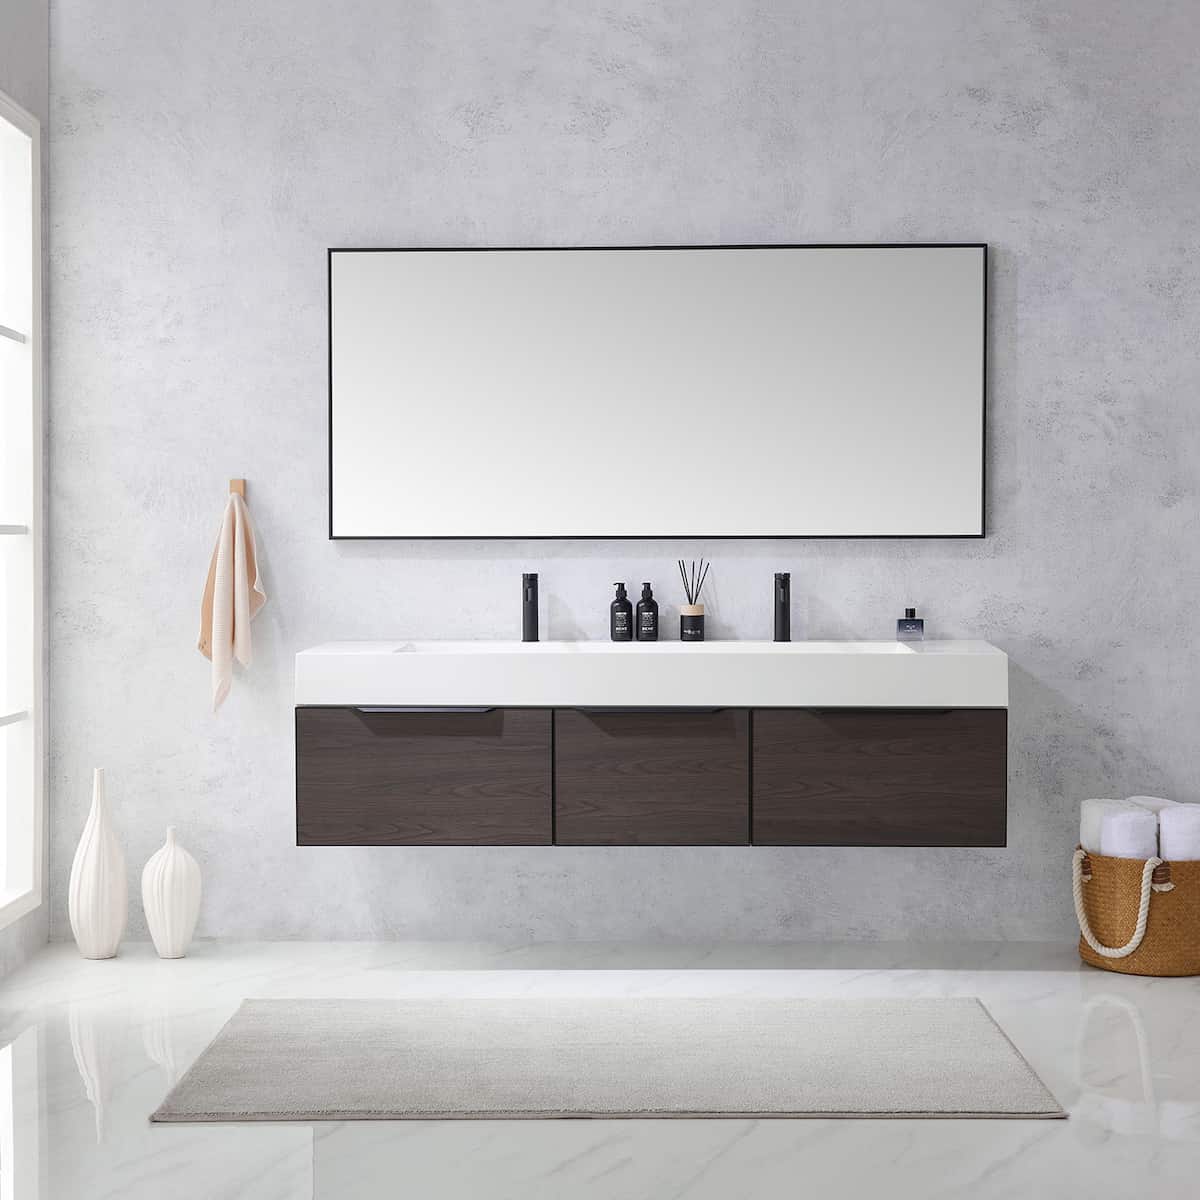 Vinnova Vegadeo 72 Inch Wall Mount Double Sink Bath Vanity in Suleiman Oak Finish with White One-Piece Composite Stone Sink Top With Mirror in Bathroom 703472-SO-WH